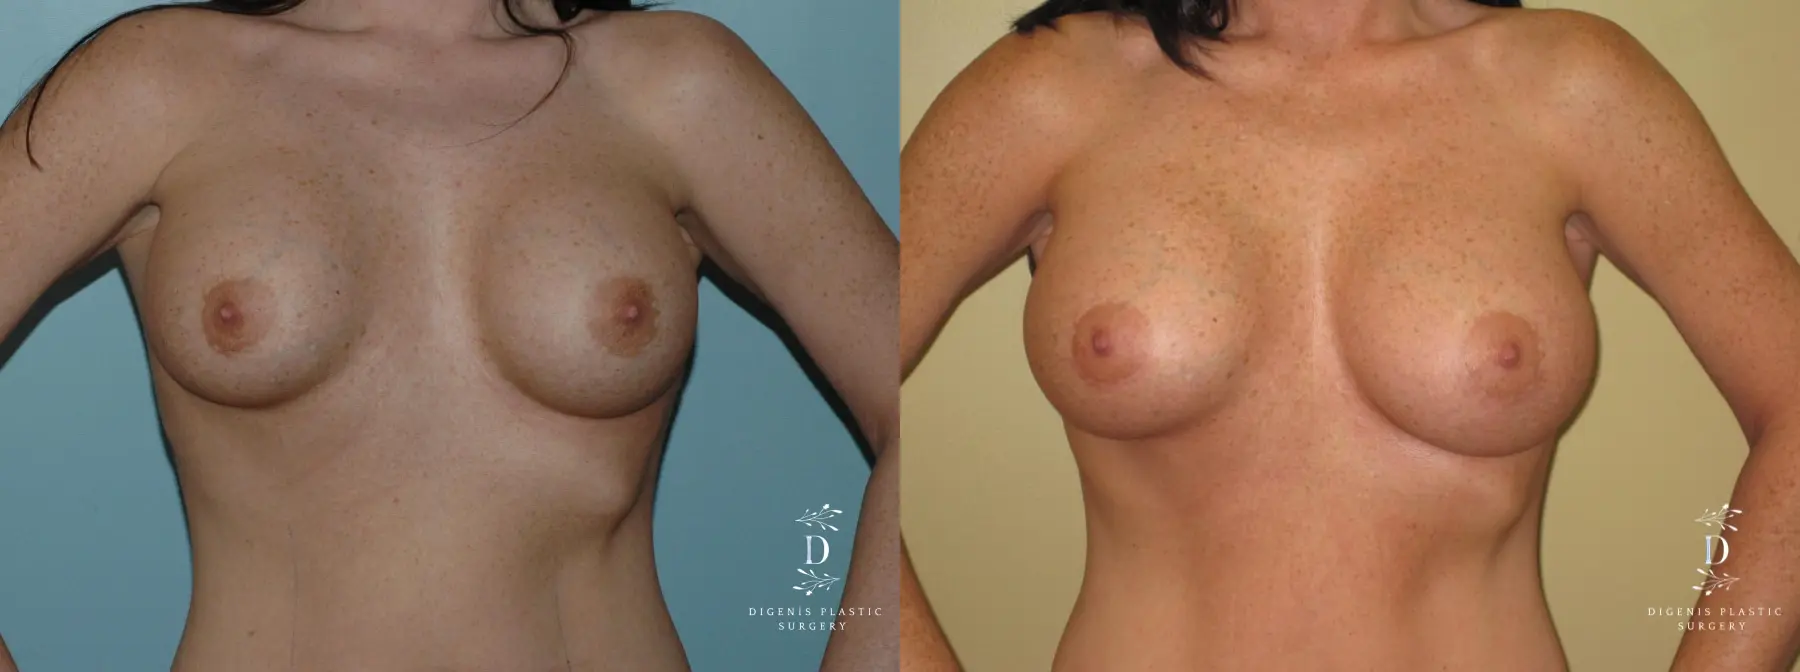 Breast Implant Exchange: Patient 1 - Before and After 1